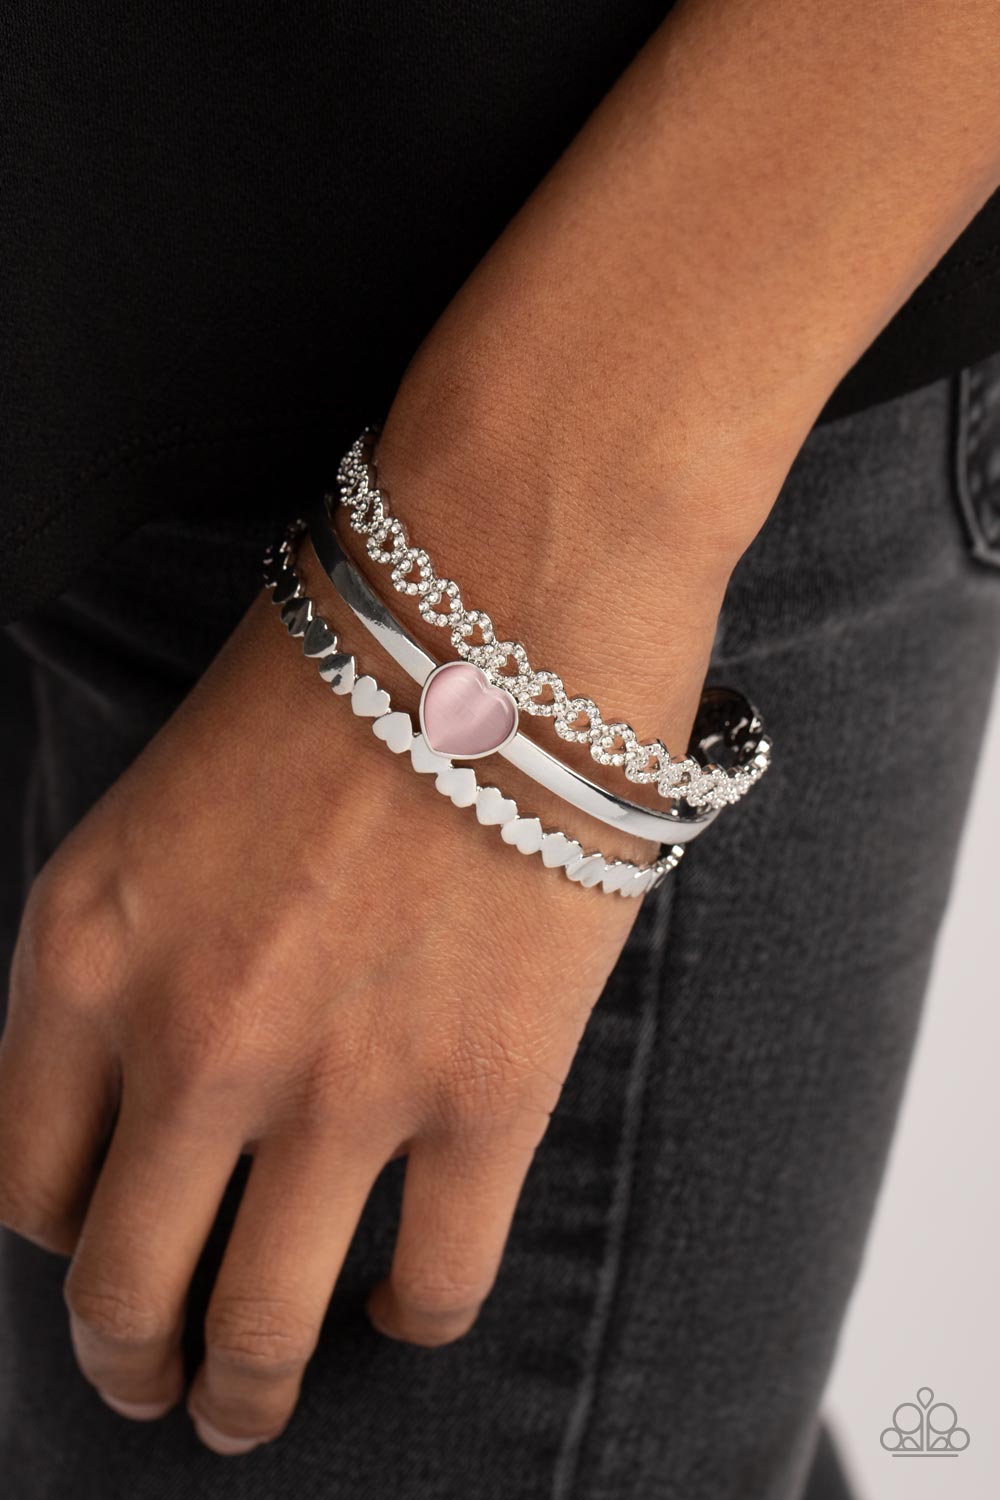 You Win My Heart - Pink and Silver Heart Bracelet - Paparazzi Accessories - Three bands of silver arc across the wrist to create a romantic-inspired cuff. A row of white rhinestone-studded hearts are turned on their sides, gracing the top band of the cuff while solid silver hearts alternate end-over-end to create the bottom band. A sleek bar of silver topped with a light pink, heart-shaped, cat's eye stone falls between the outer bands, emerging as a polished focal point in a whimsical finish.